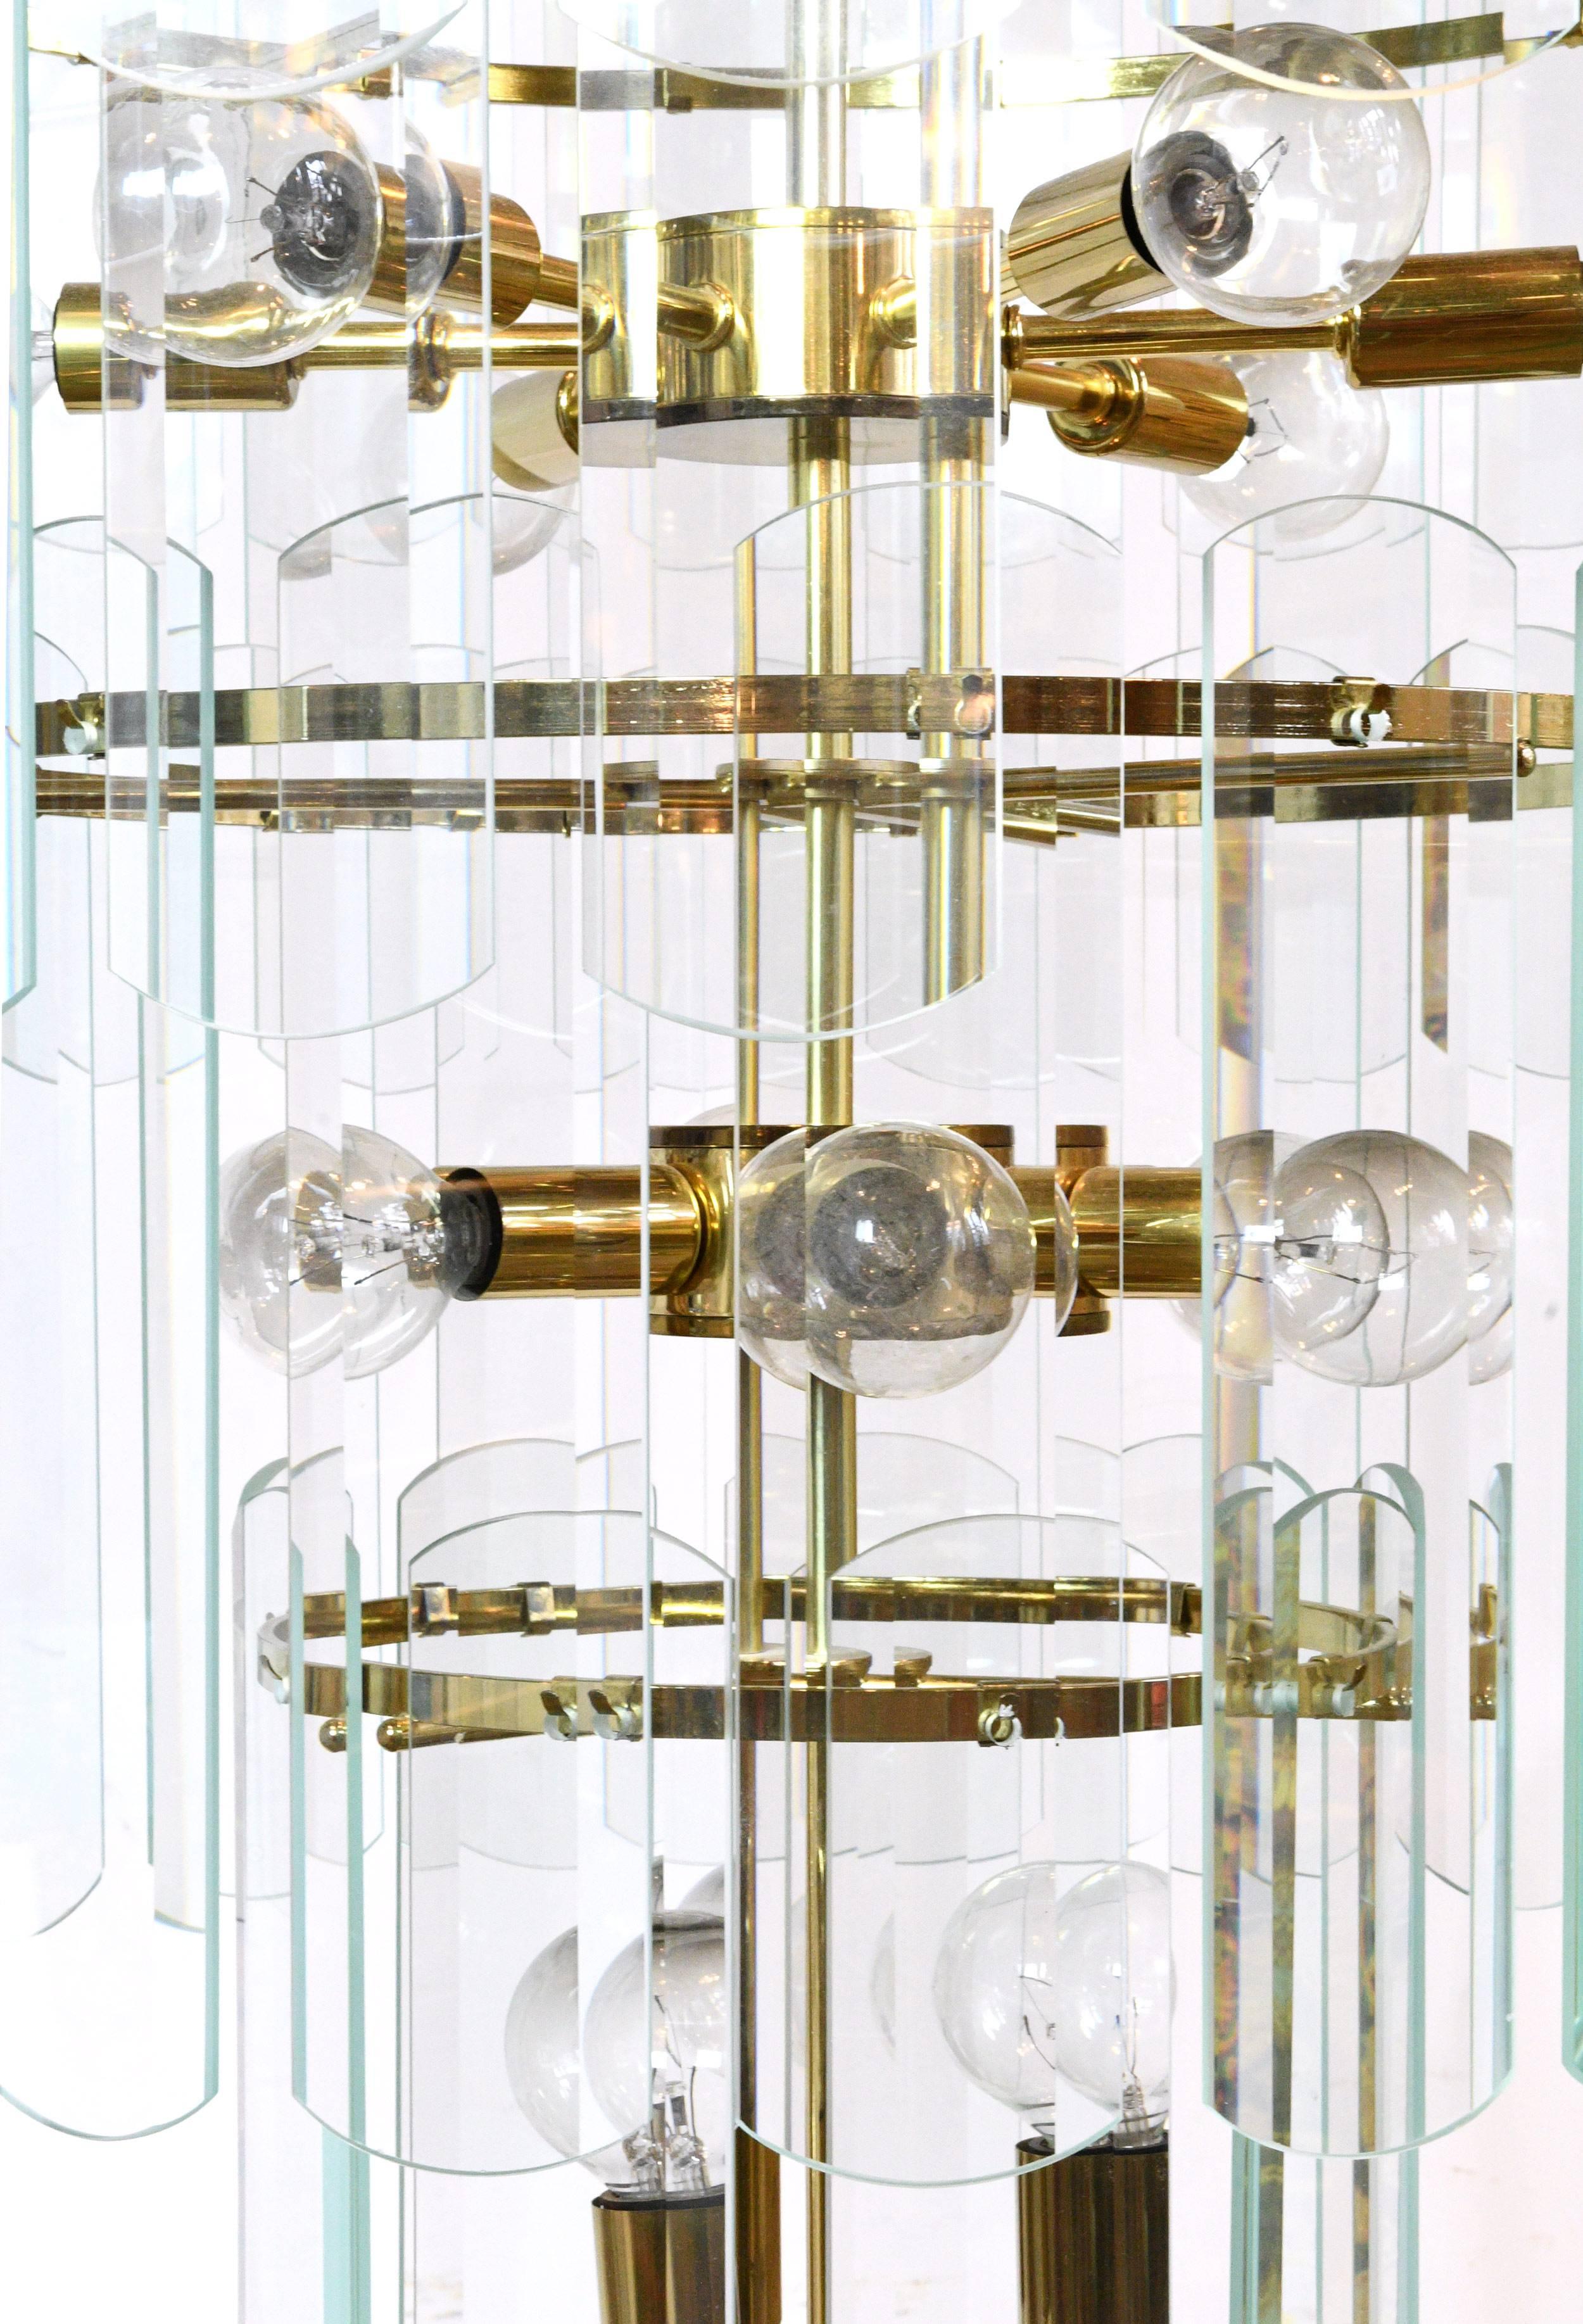 This large chandelier features a swirling brass body surrounded by 93 glass panels spread out between four-tiers. The blue-tinted panels offer clean lines and crisp reflections. 27 bulbs give the fixture a dazzling radiance that will light up any